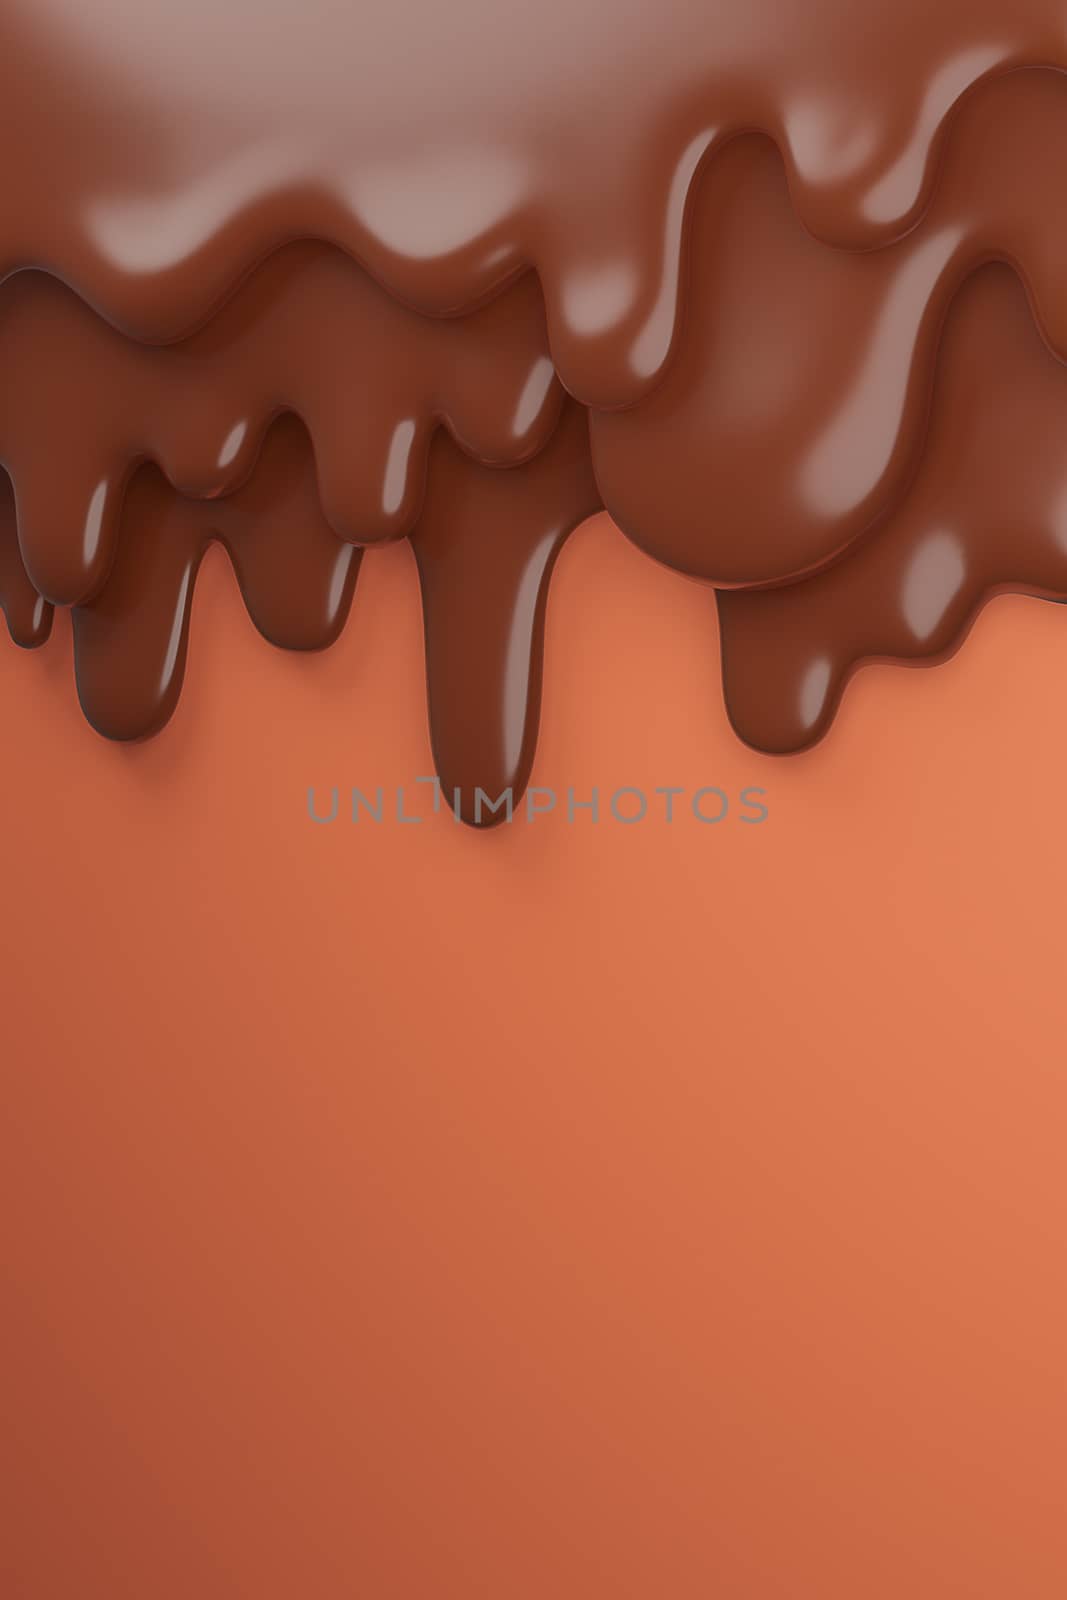 Melted milk brown chocolate flow down.,3d model and illustration. by anotestocker